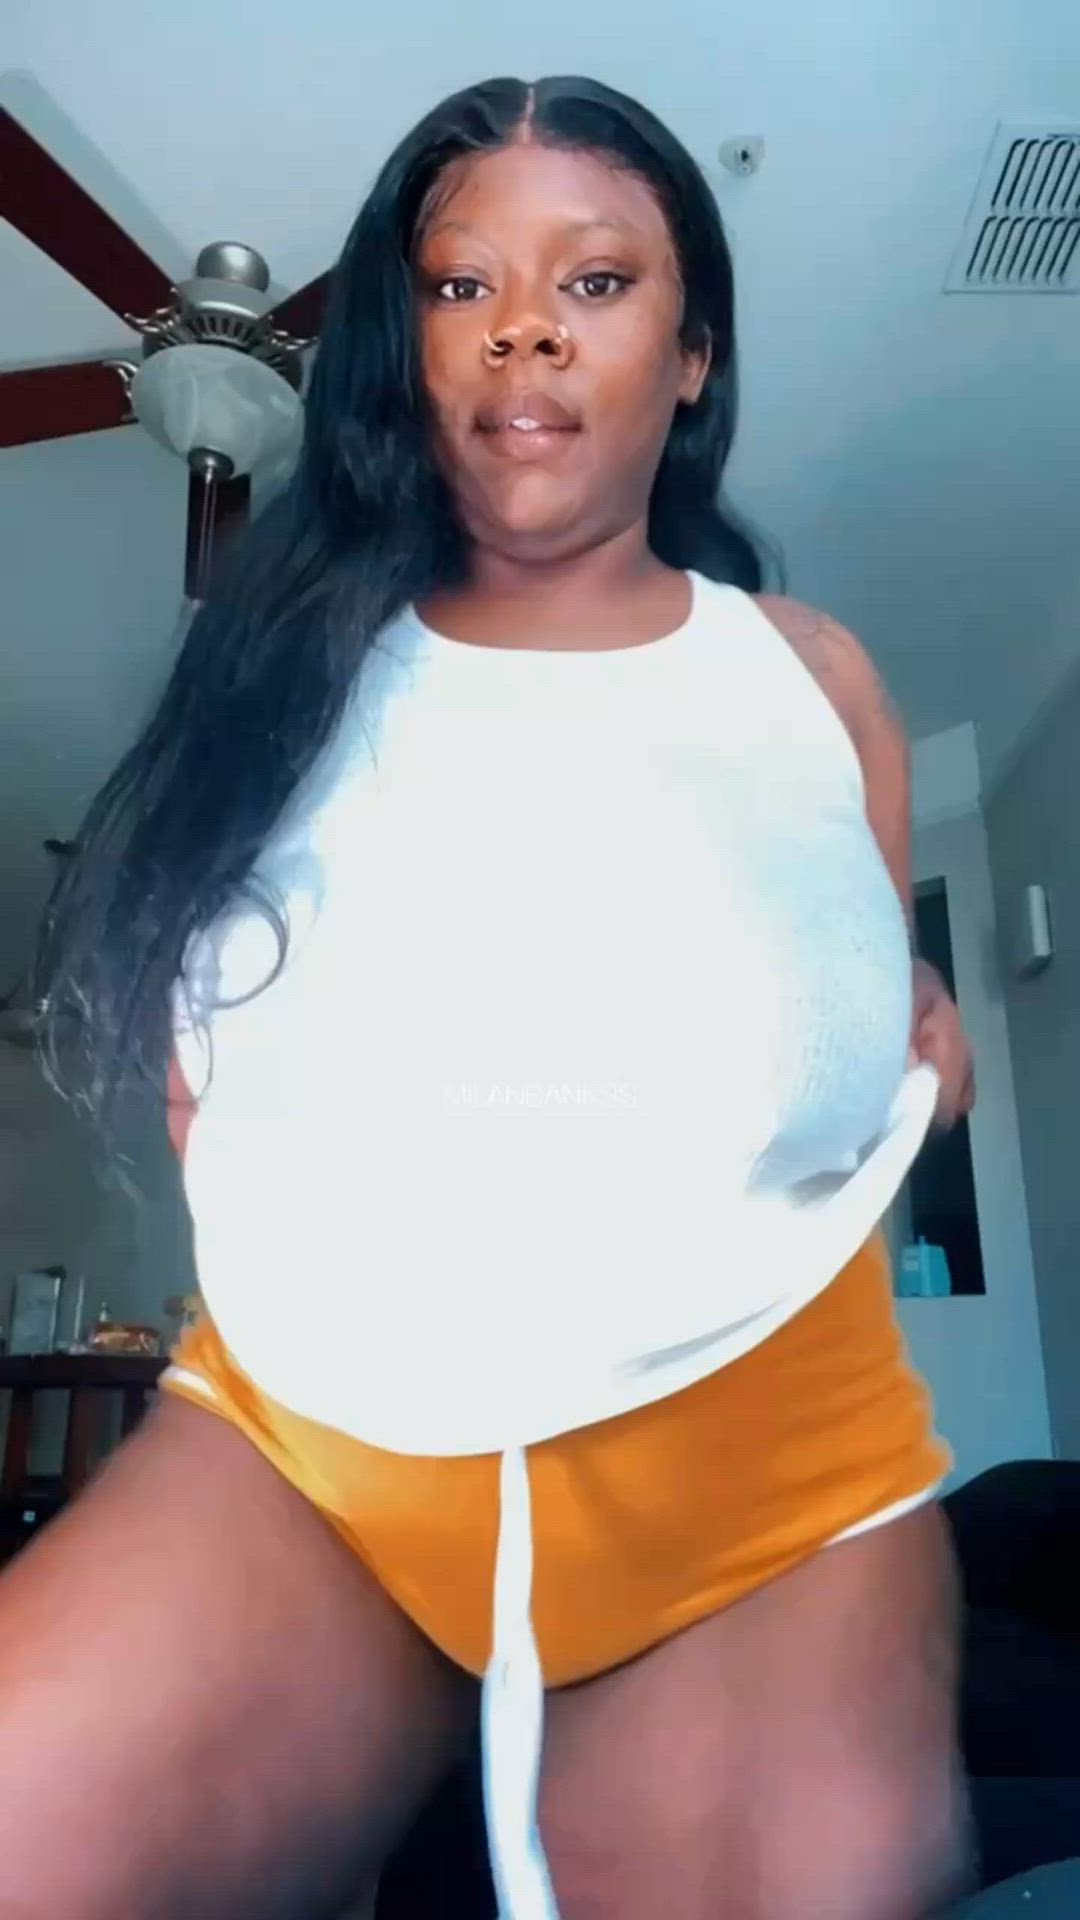 Big Tits porn video with onlyfans model MilanBankss <strong>@milanbankss</strong>